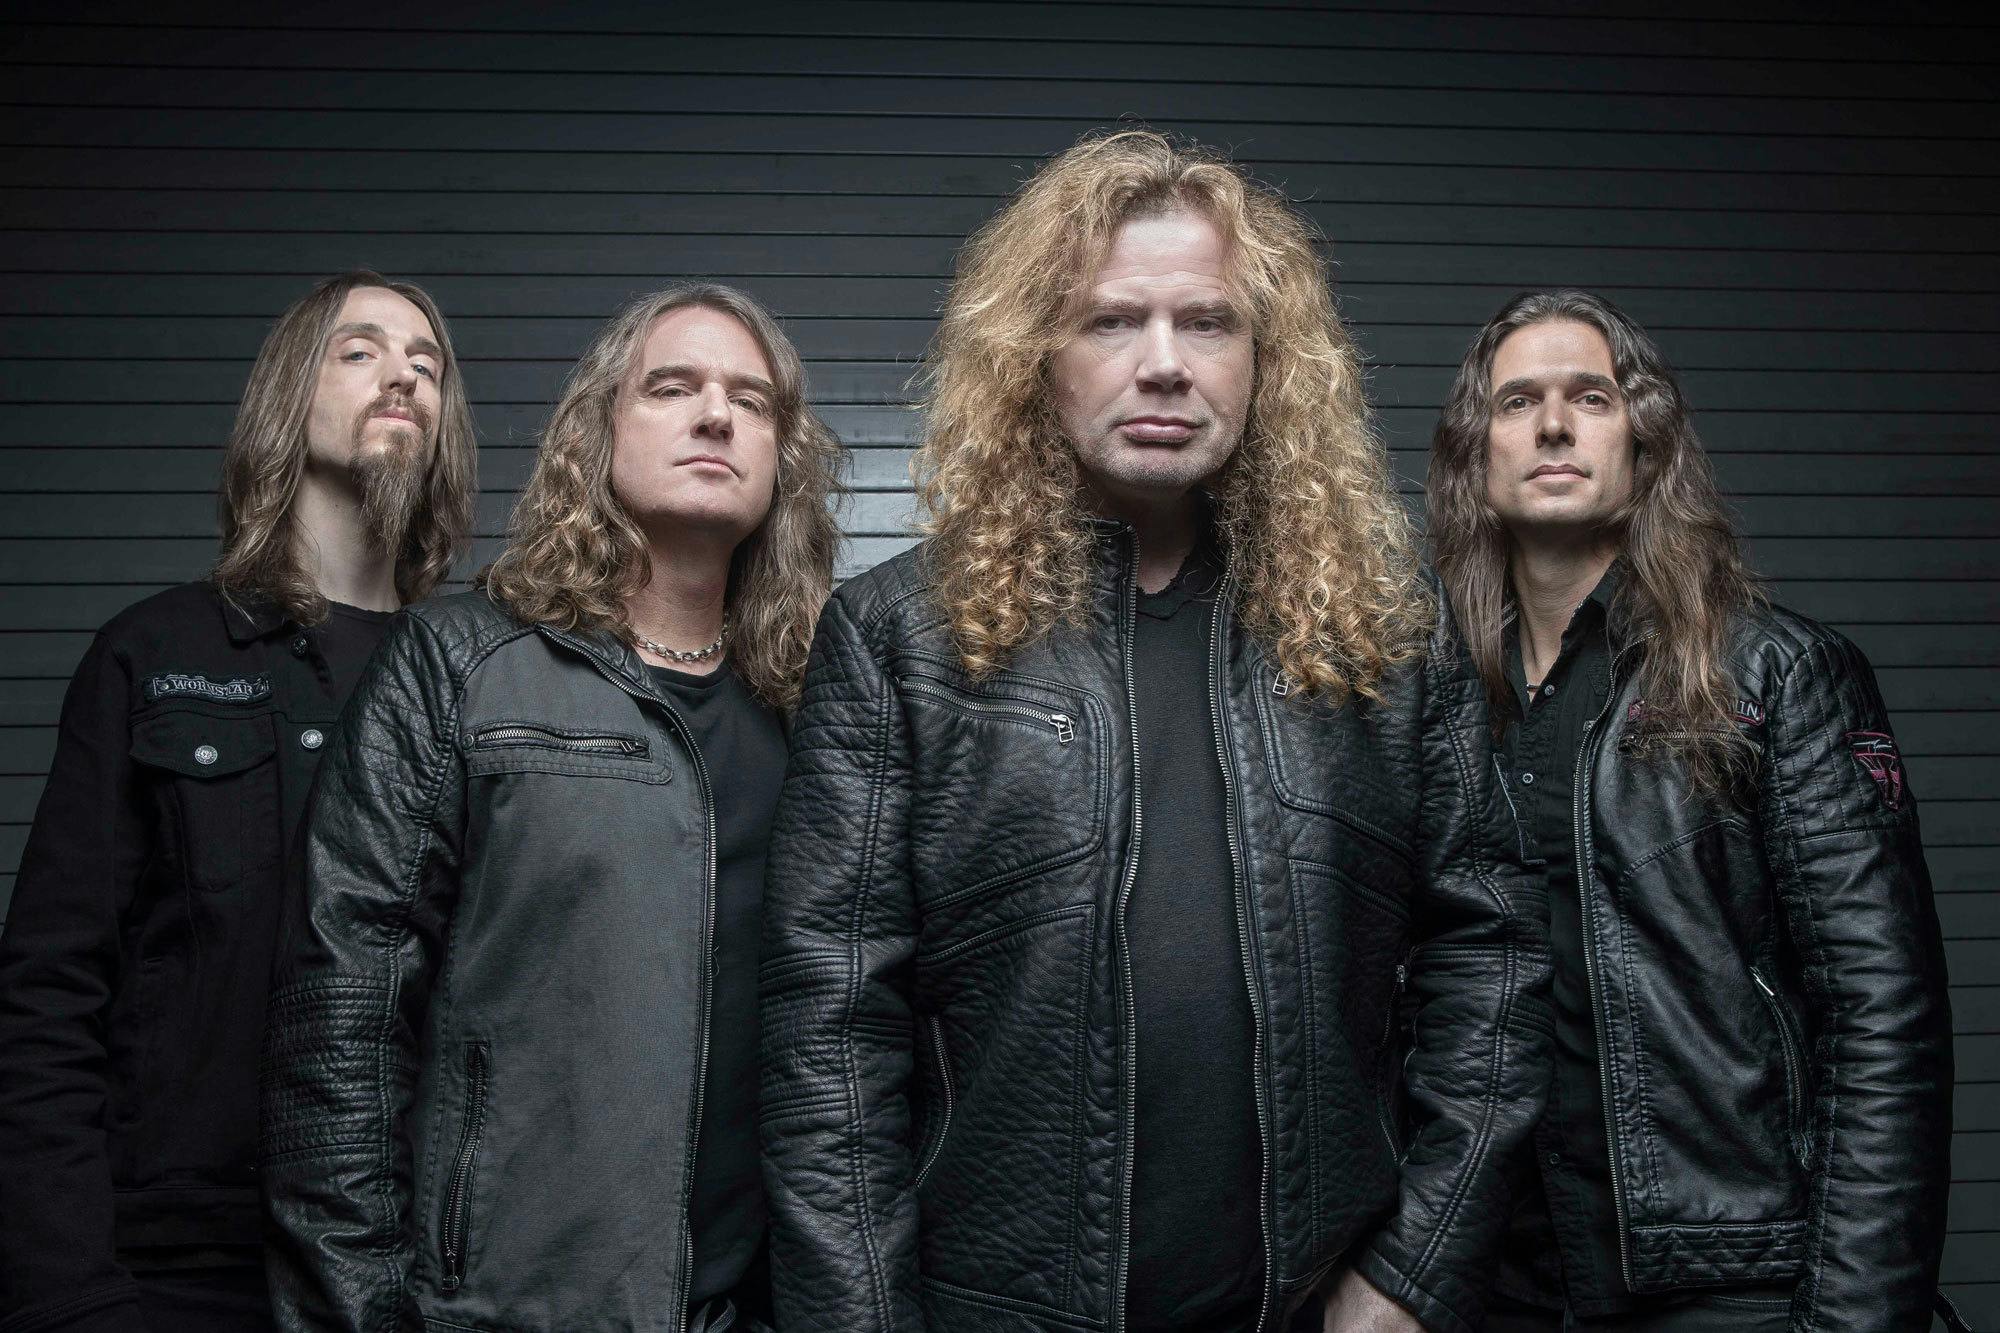 The New Megadeth Album Is Sounding "Heavy As Hell"